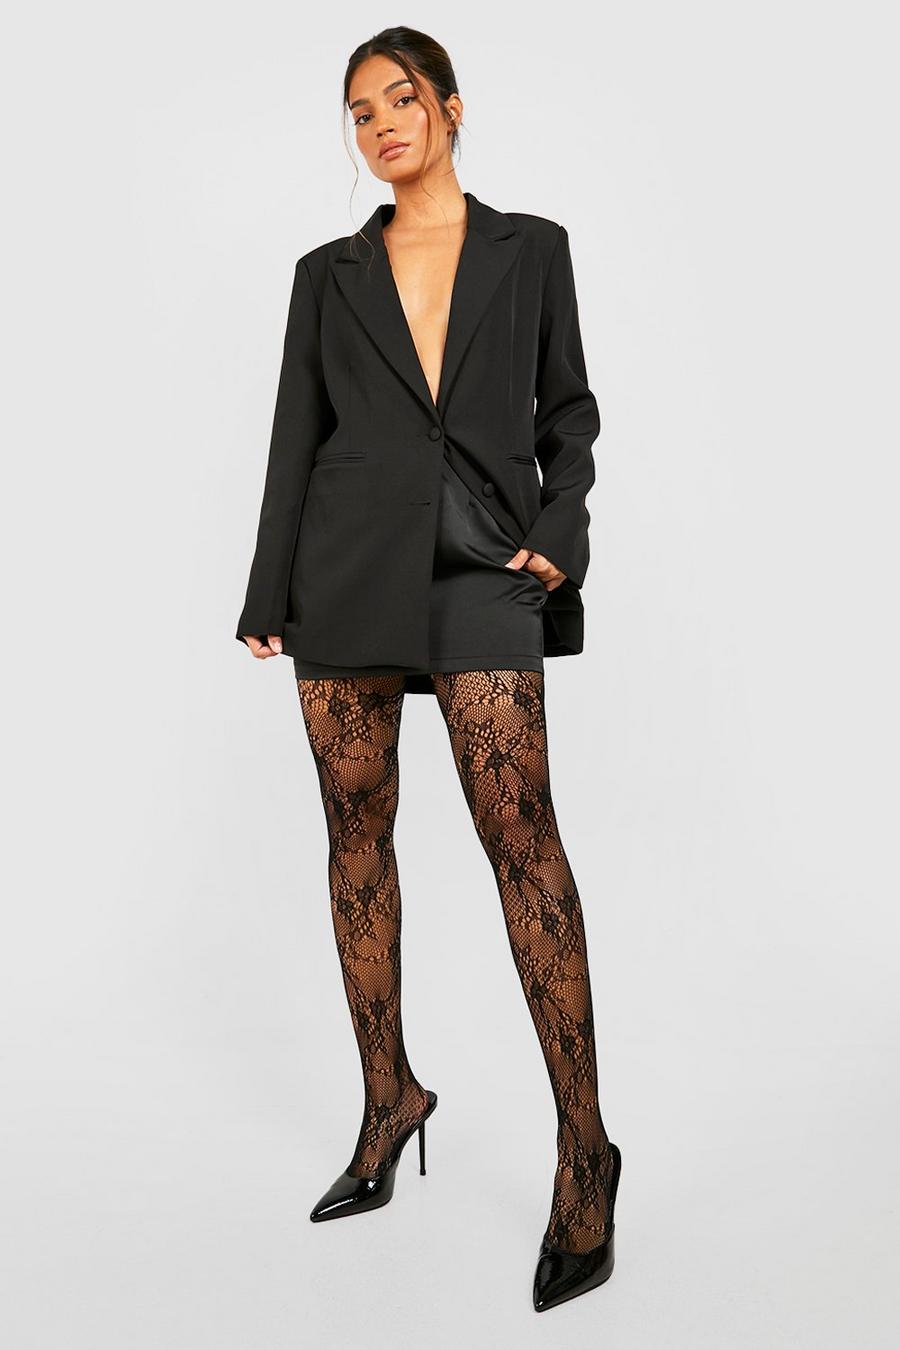 Bow Detail Back Seam Tights